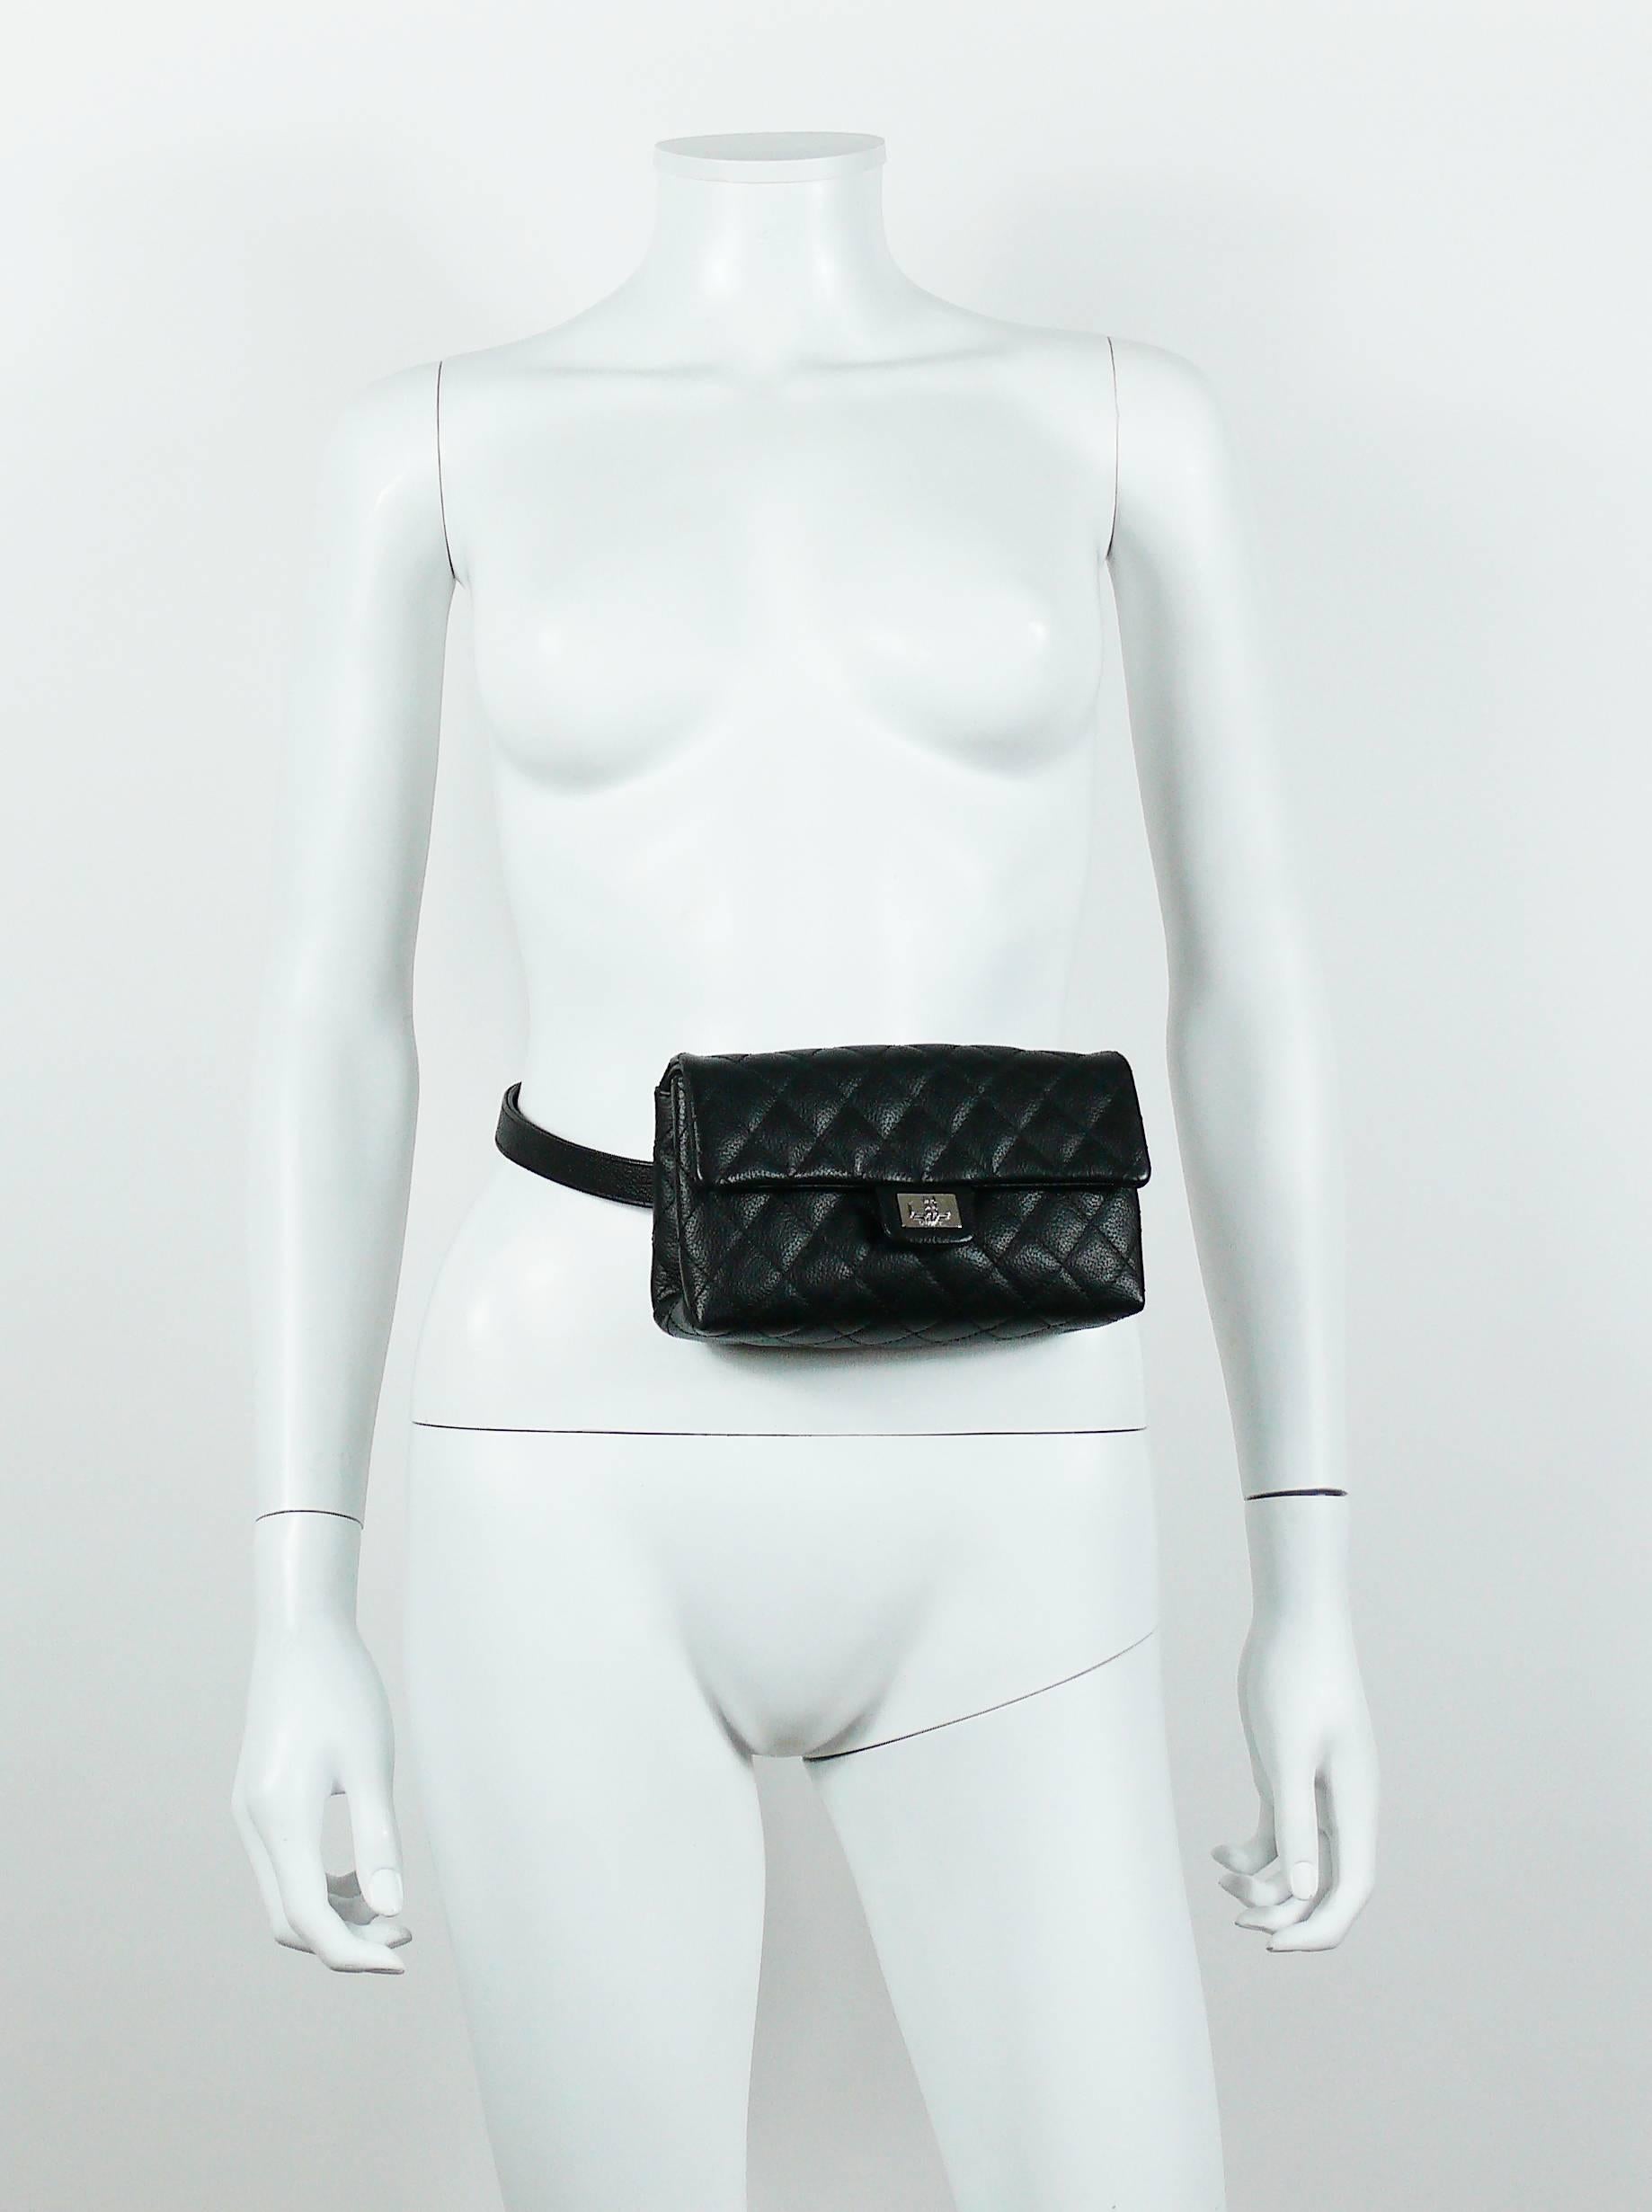 CHANEL UNIFORM black quilted grained leather waist-belt bag.

Please note this item was original part of a CHANEL uniform.

BAG features :
- Flap top with magnetic snap closure.
- Black textile lining
- One inner pocket.
- Silver toned